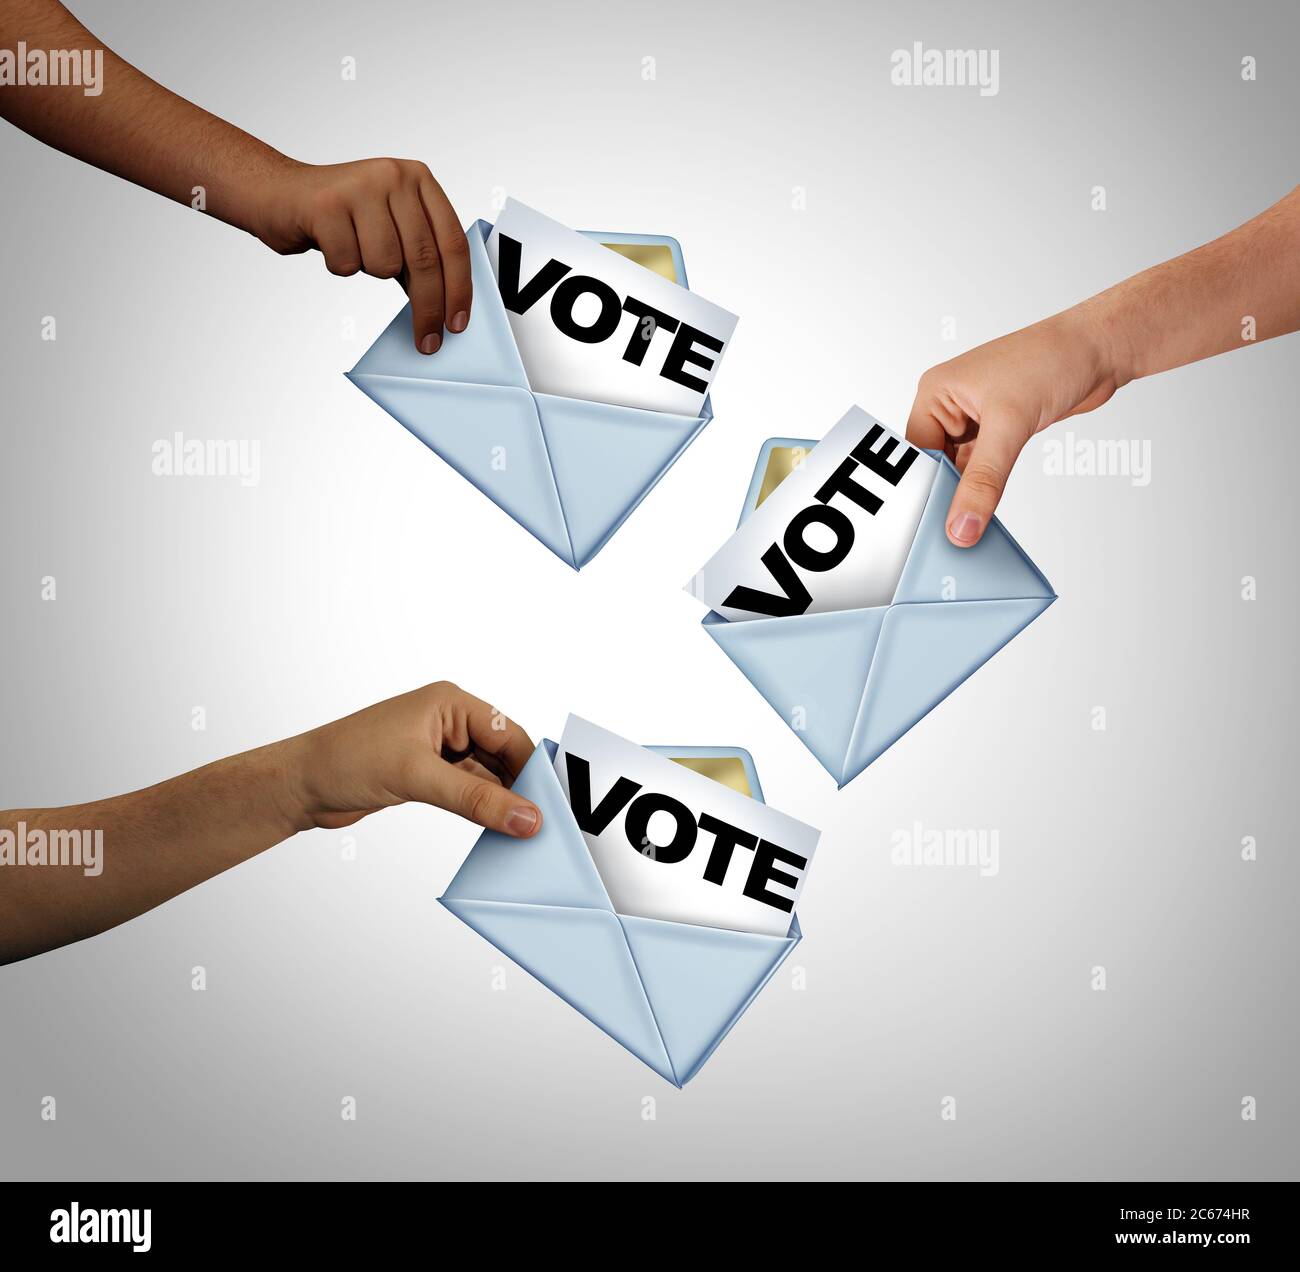 Mail in voting and vote with mailed ballots as an election symbol of diverse people casting a ballot at a polling postal station. Stock Photo